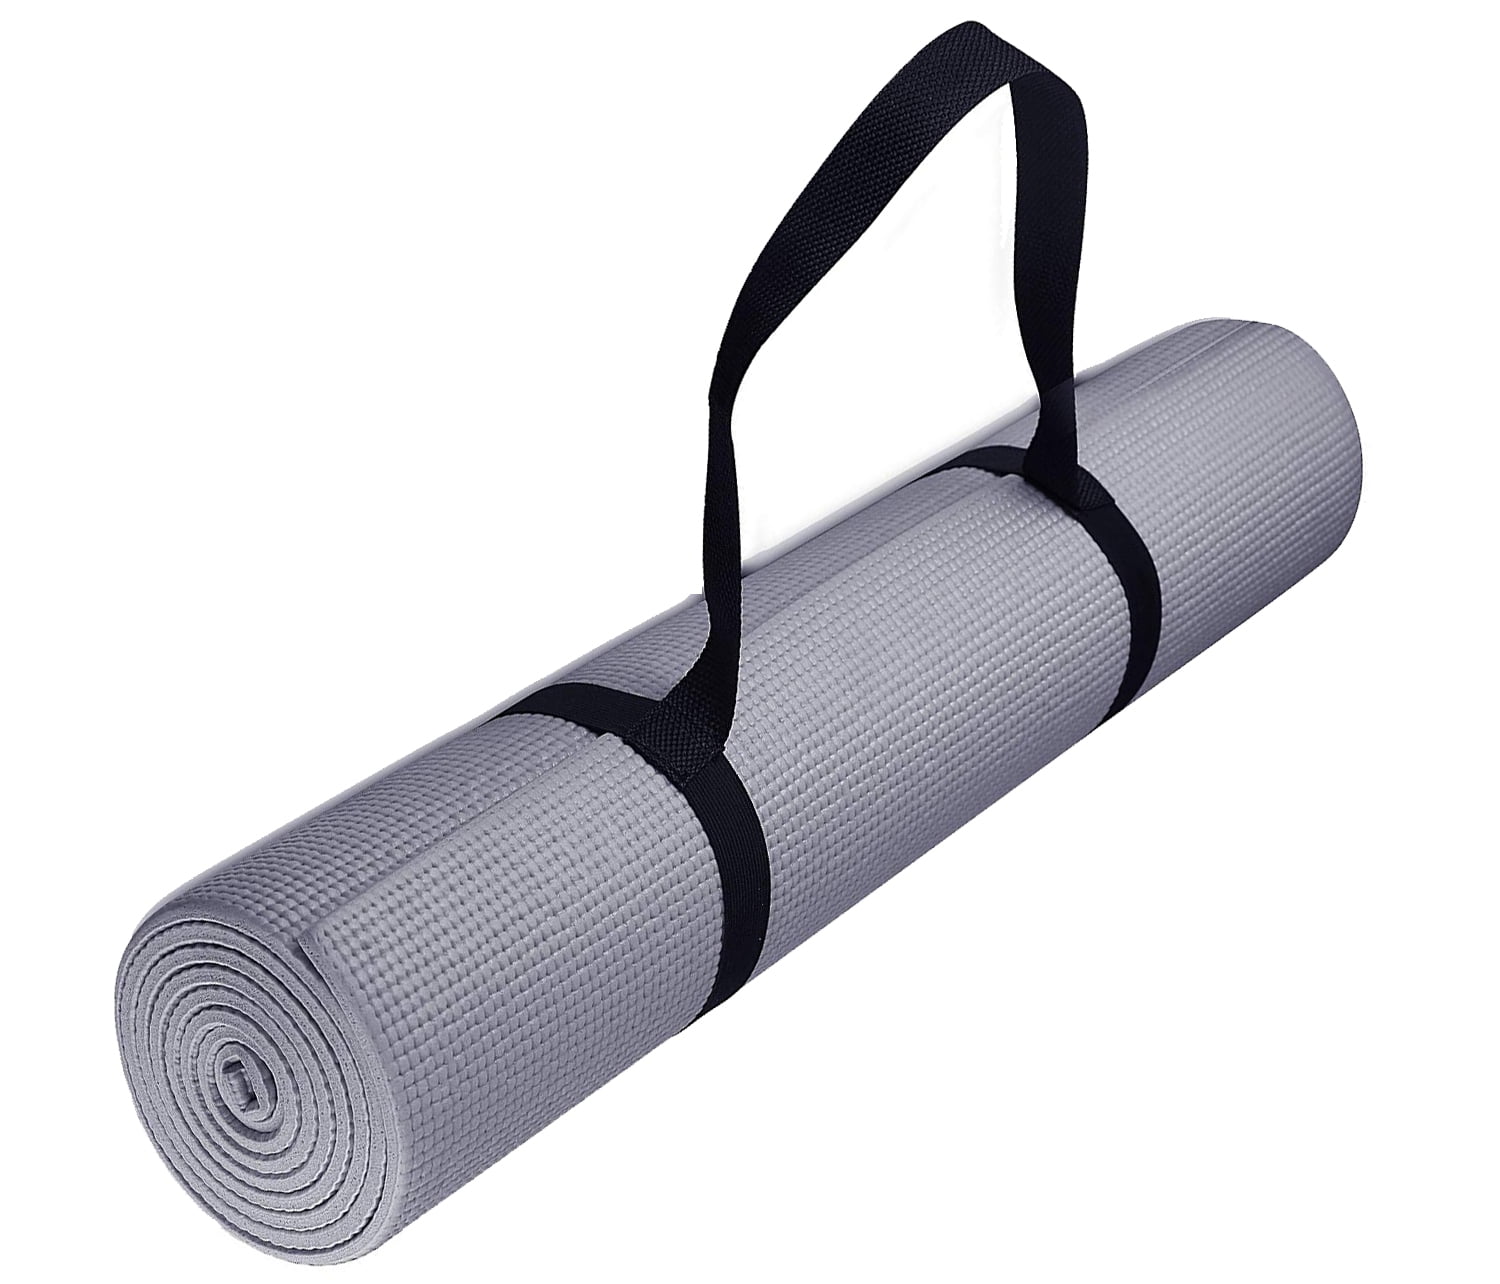 COOLMOON 1/4 Inch Extra Thick Yoga Mat Double-Sided Non Slip,Yoga